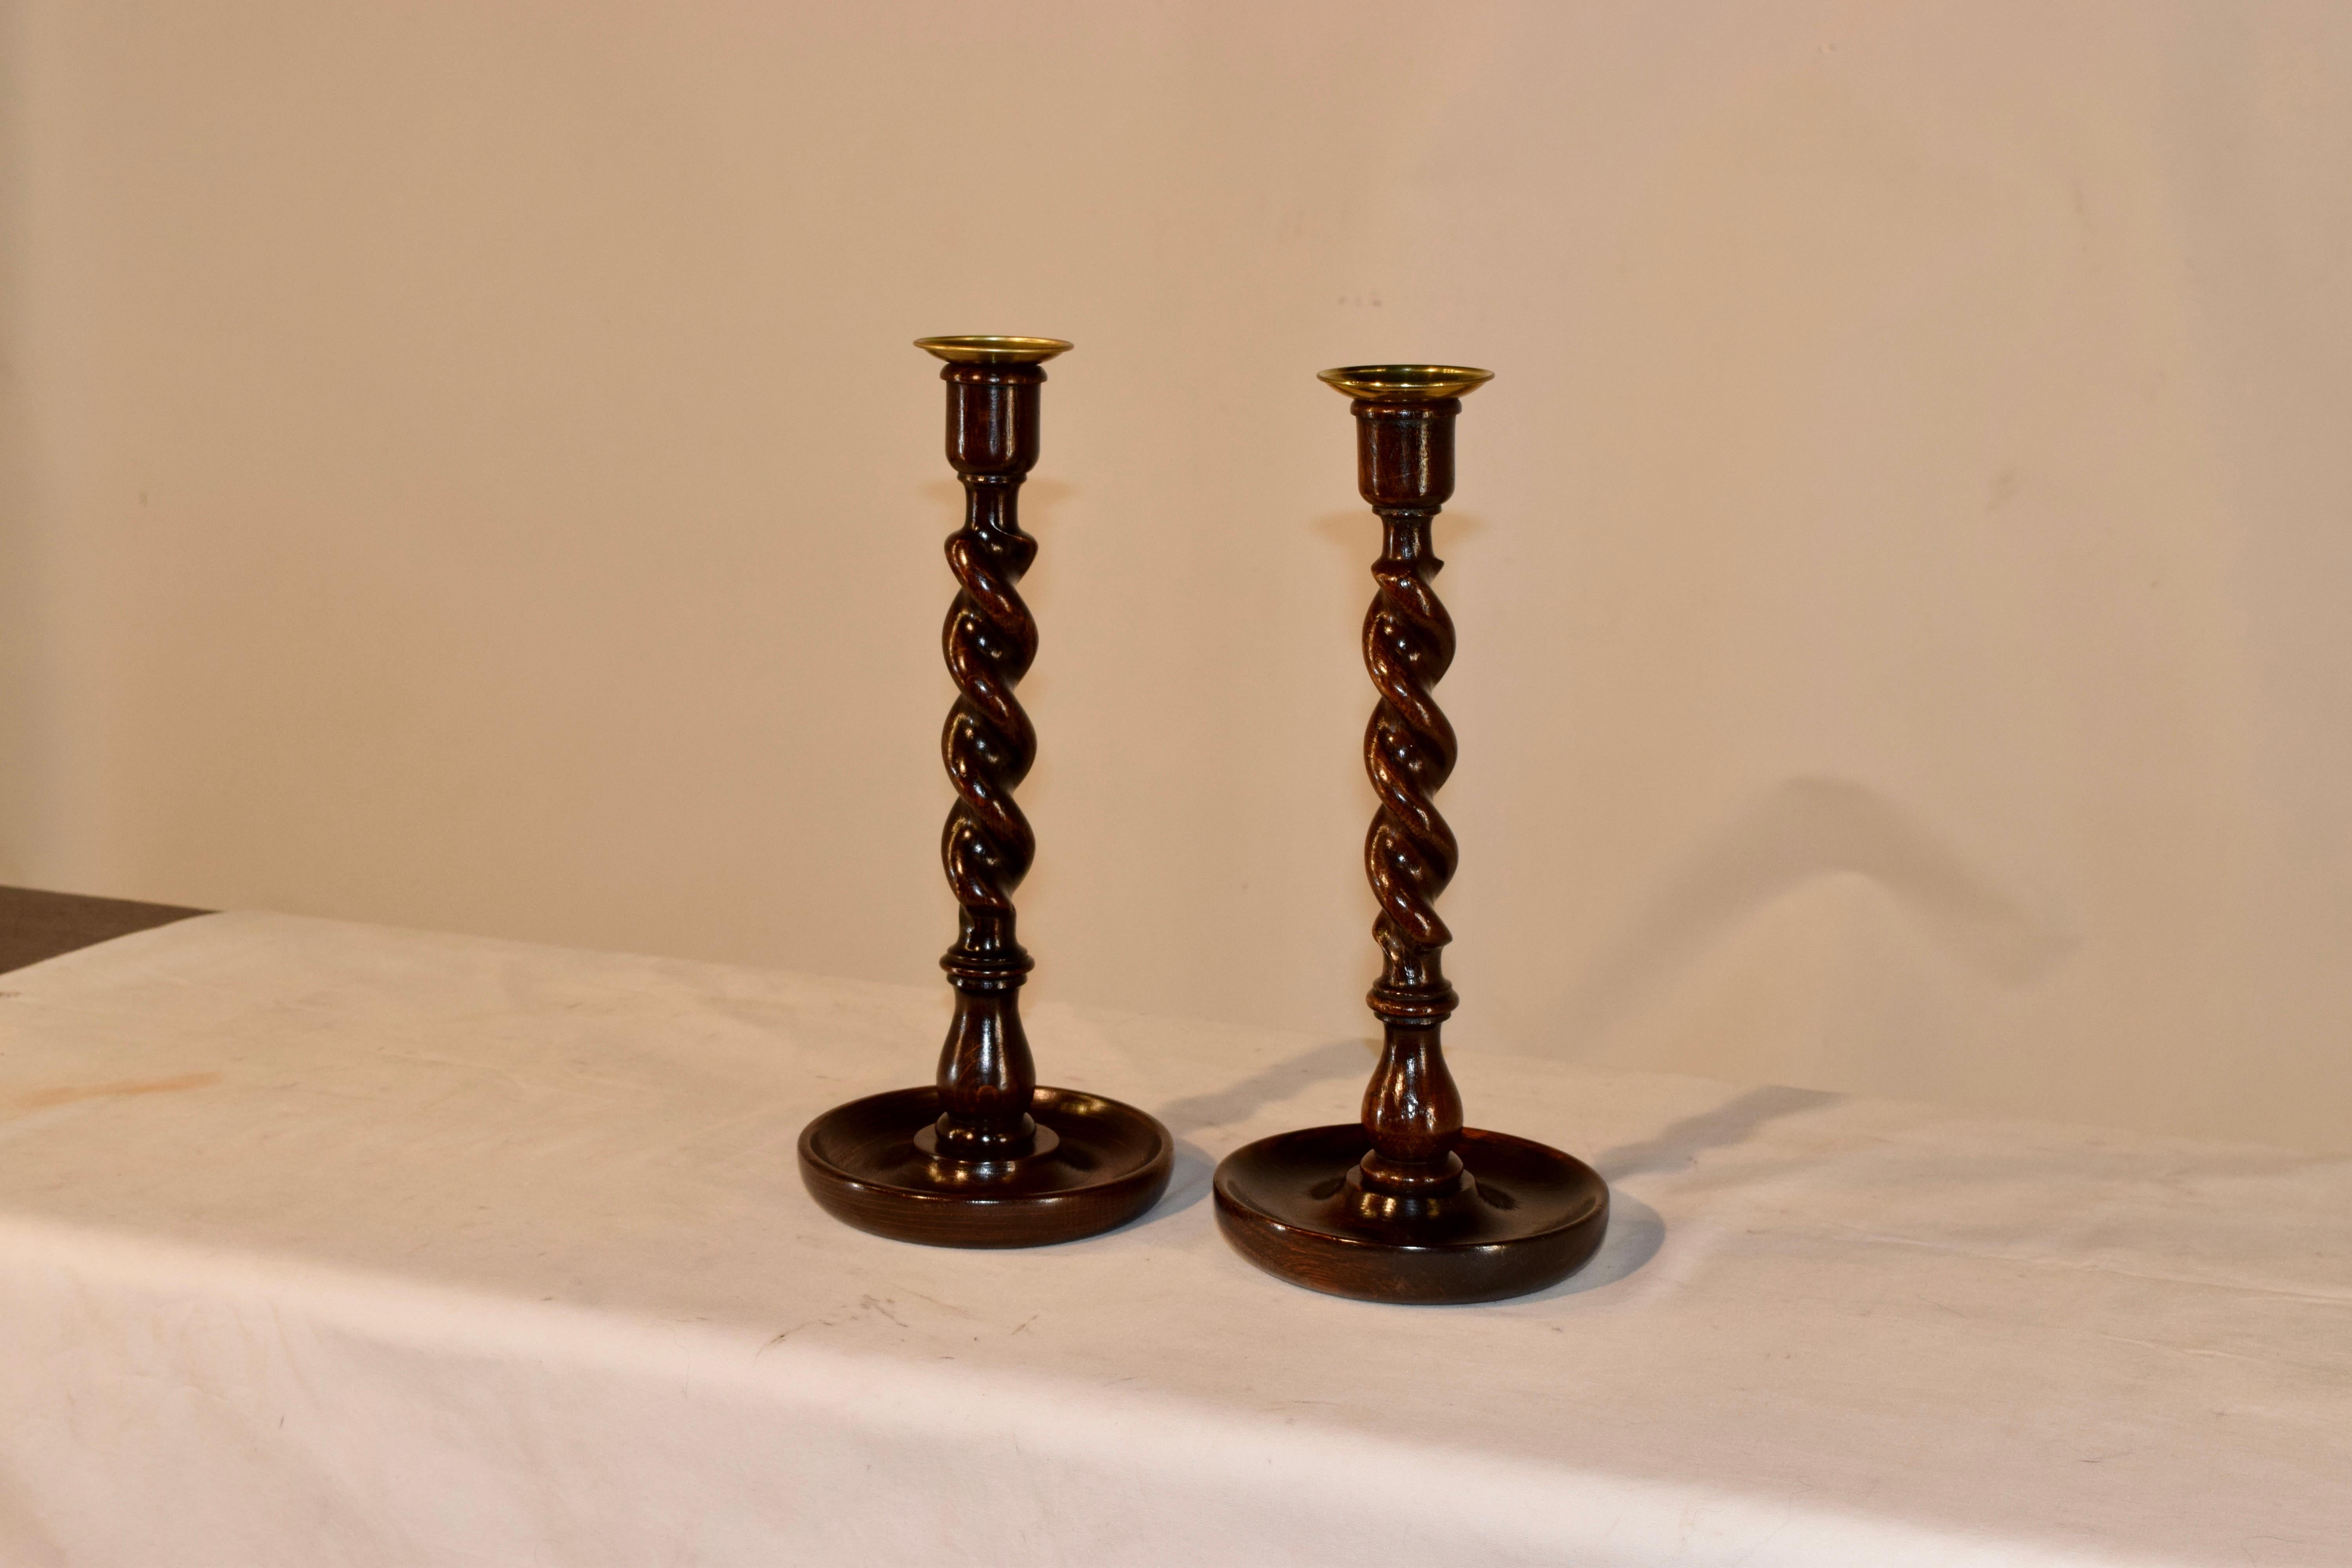 Pair of late 19th century oak candlesticks from England with a turned candle cup with original brass insert and a barley twist stem supported on a hand turned dish shaped base.